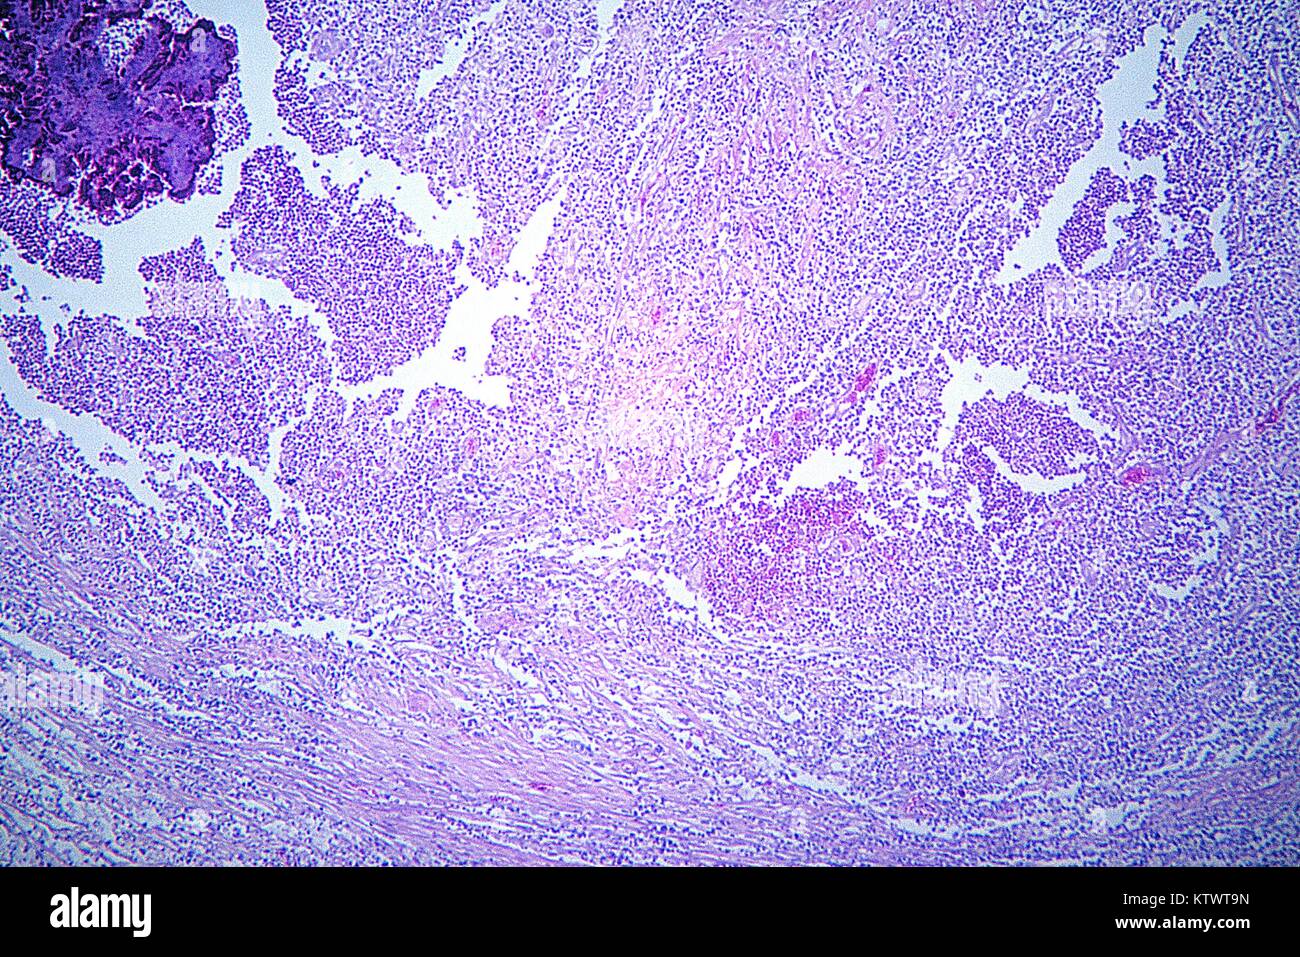 A photomicrograph depicting the histopathology associated with pulmonary actinomycosis. A suppurative disease caused by Gram-positive endogenous oral bacteria of the family Actinomycetaceae . Note the fibrotic, thick-walled abscess formation, and presence of granulation tissue indicative of a chronic inflammatory process. Image courtesy CDC/Dr. Martin Hicklin, 1964. Stock Photo